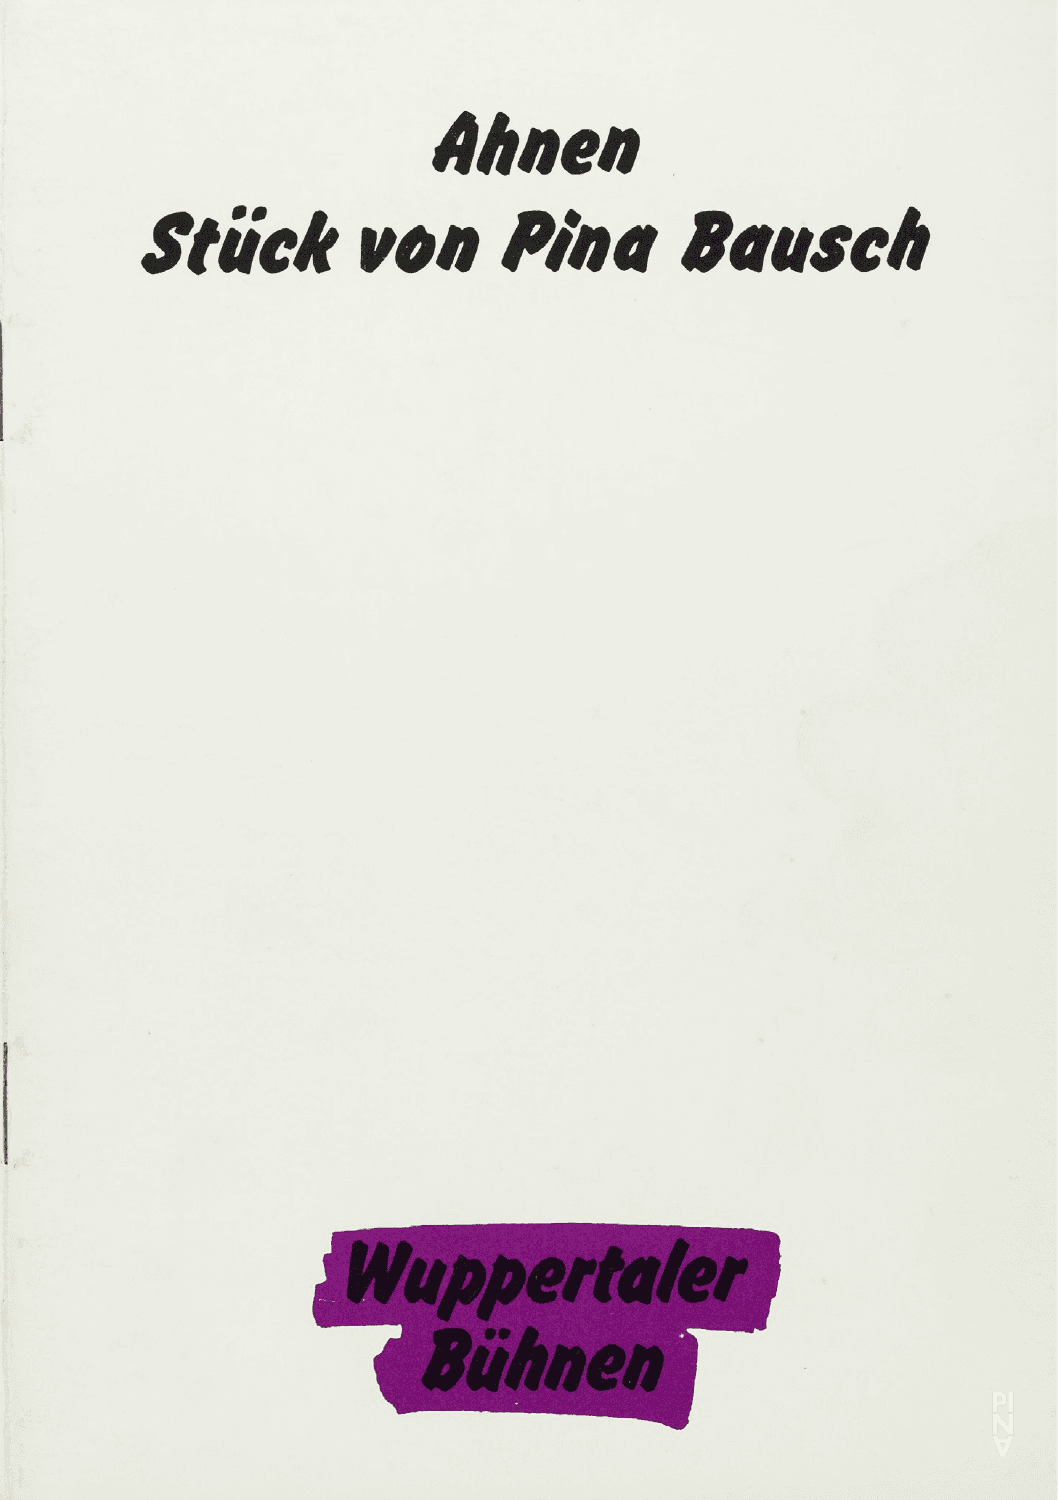 Booklet for “Ahnen” by Pina Bausch with Tanztheater Wuppertal in in Wuppertal, March 21, 1987